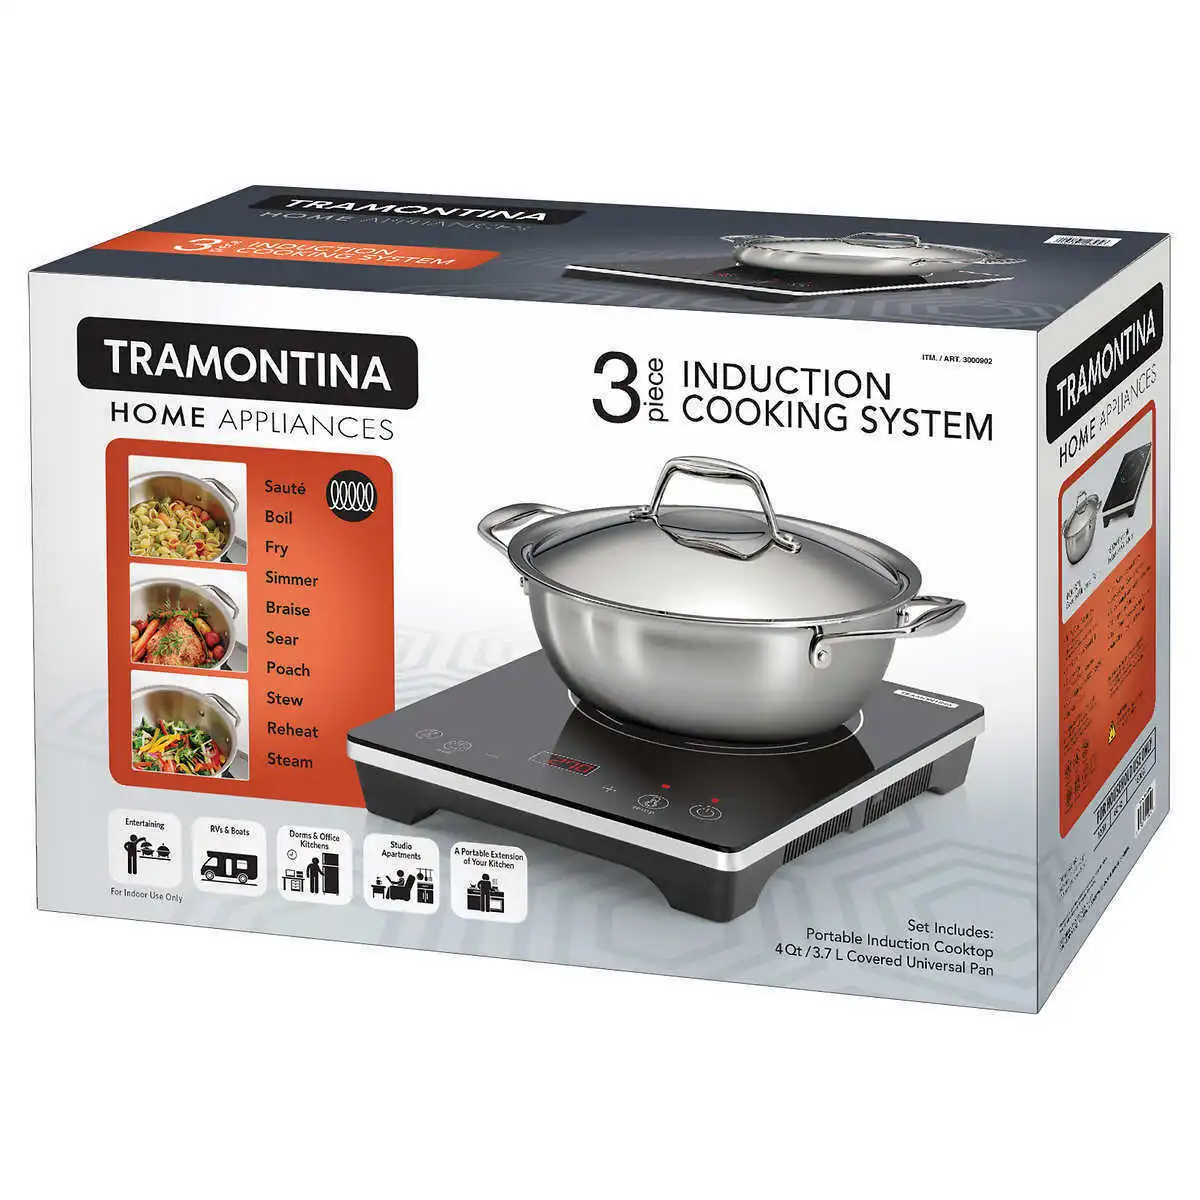 How To Use The Tramontina Induction Cooktop